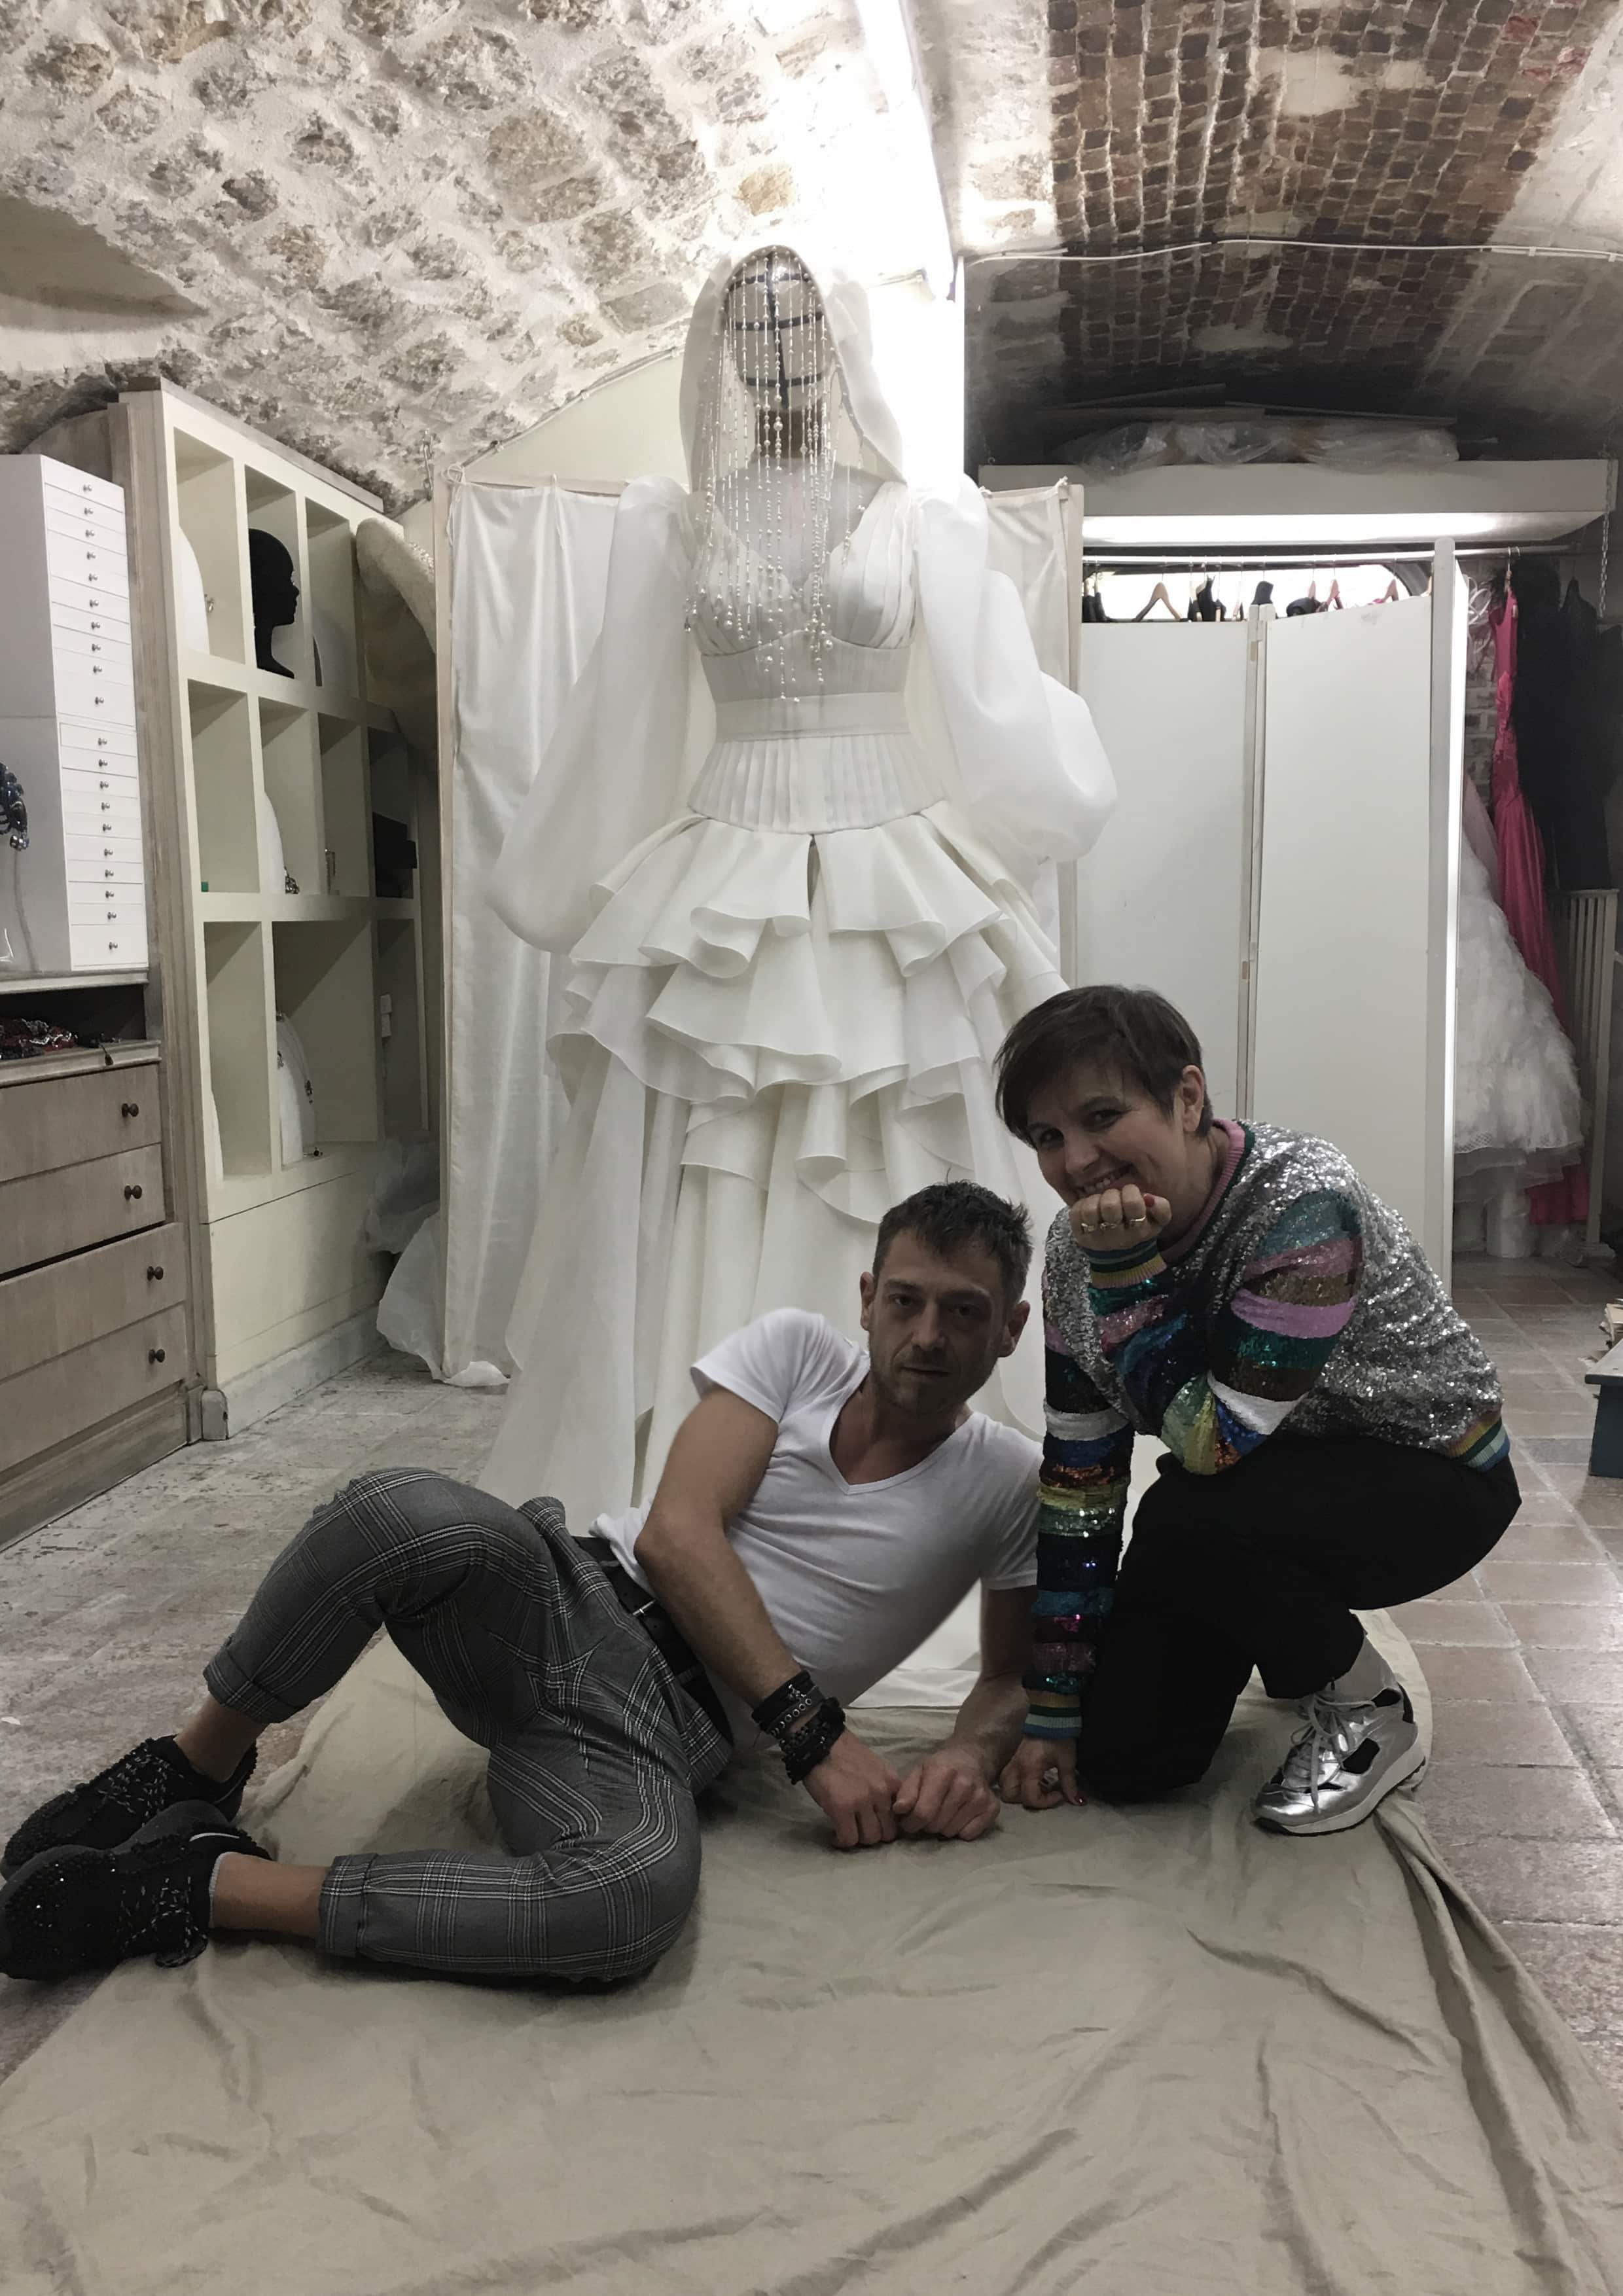 beyonce dress and designers yassen samouilov and livia stoianova from couture house on aura tout vu 